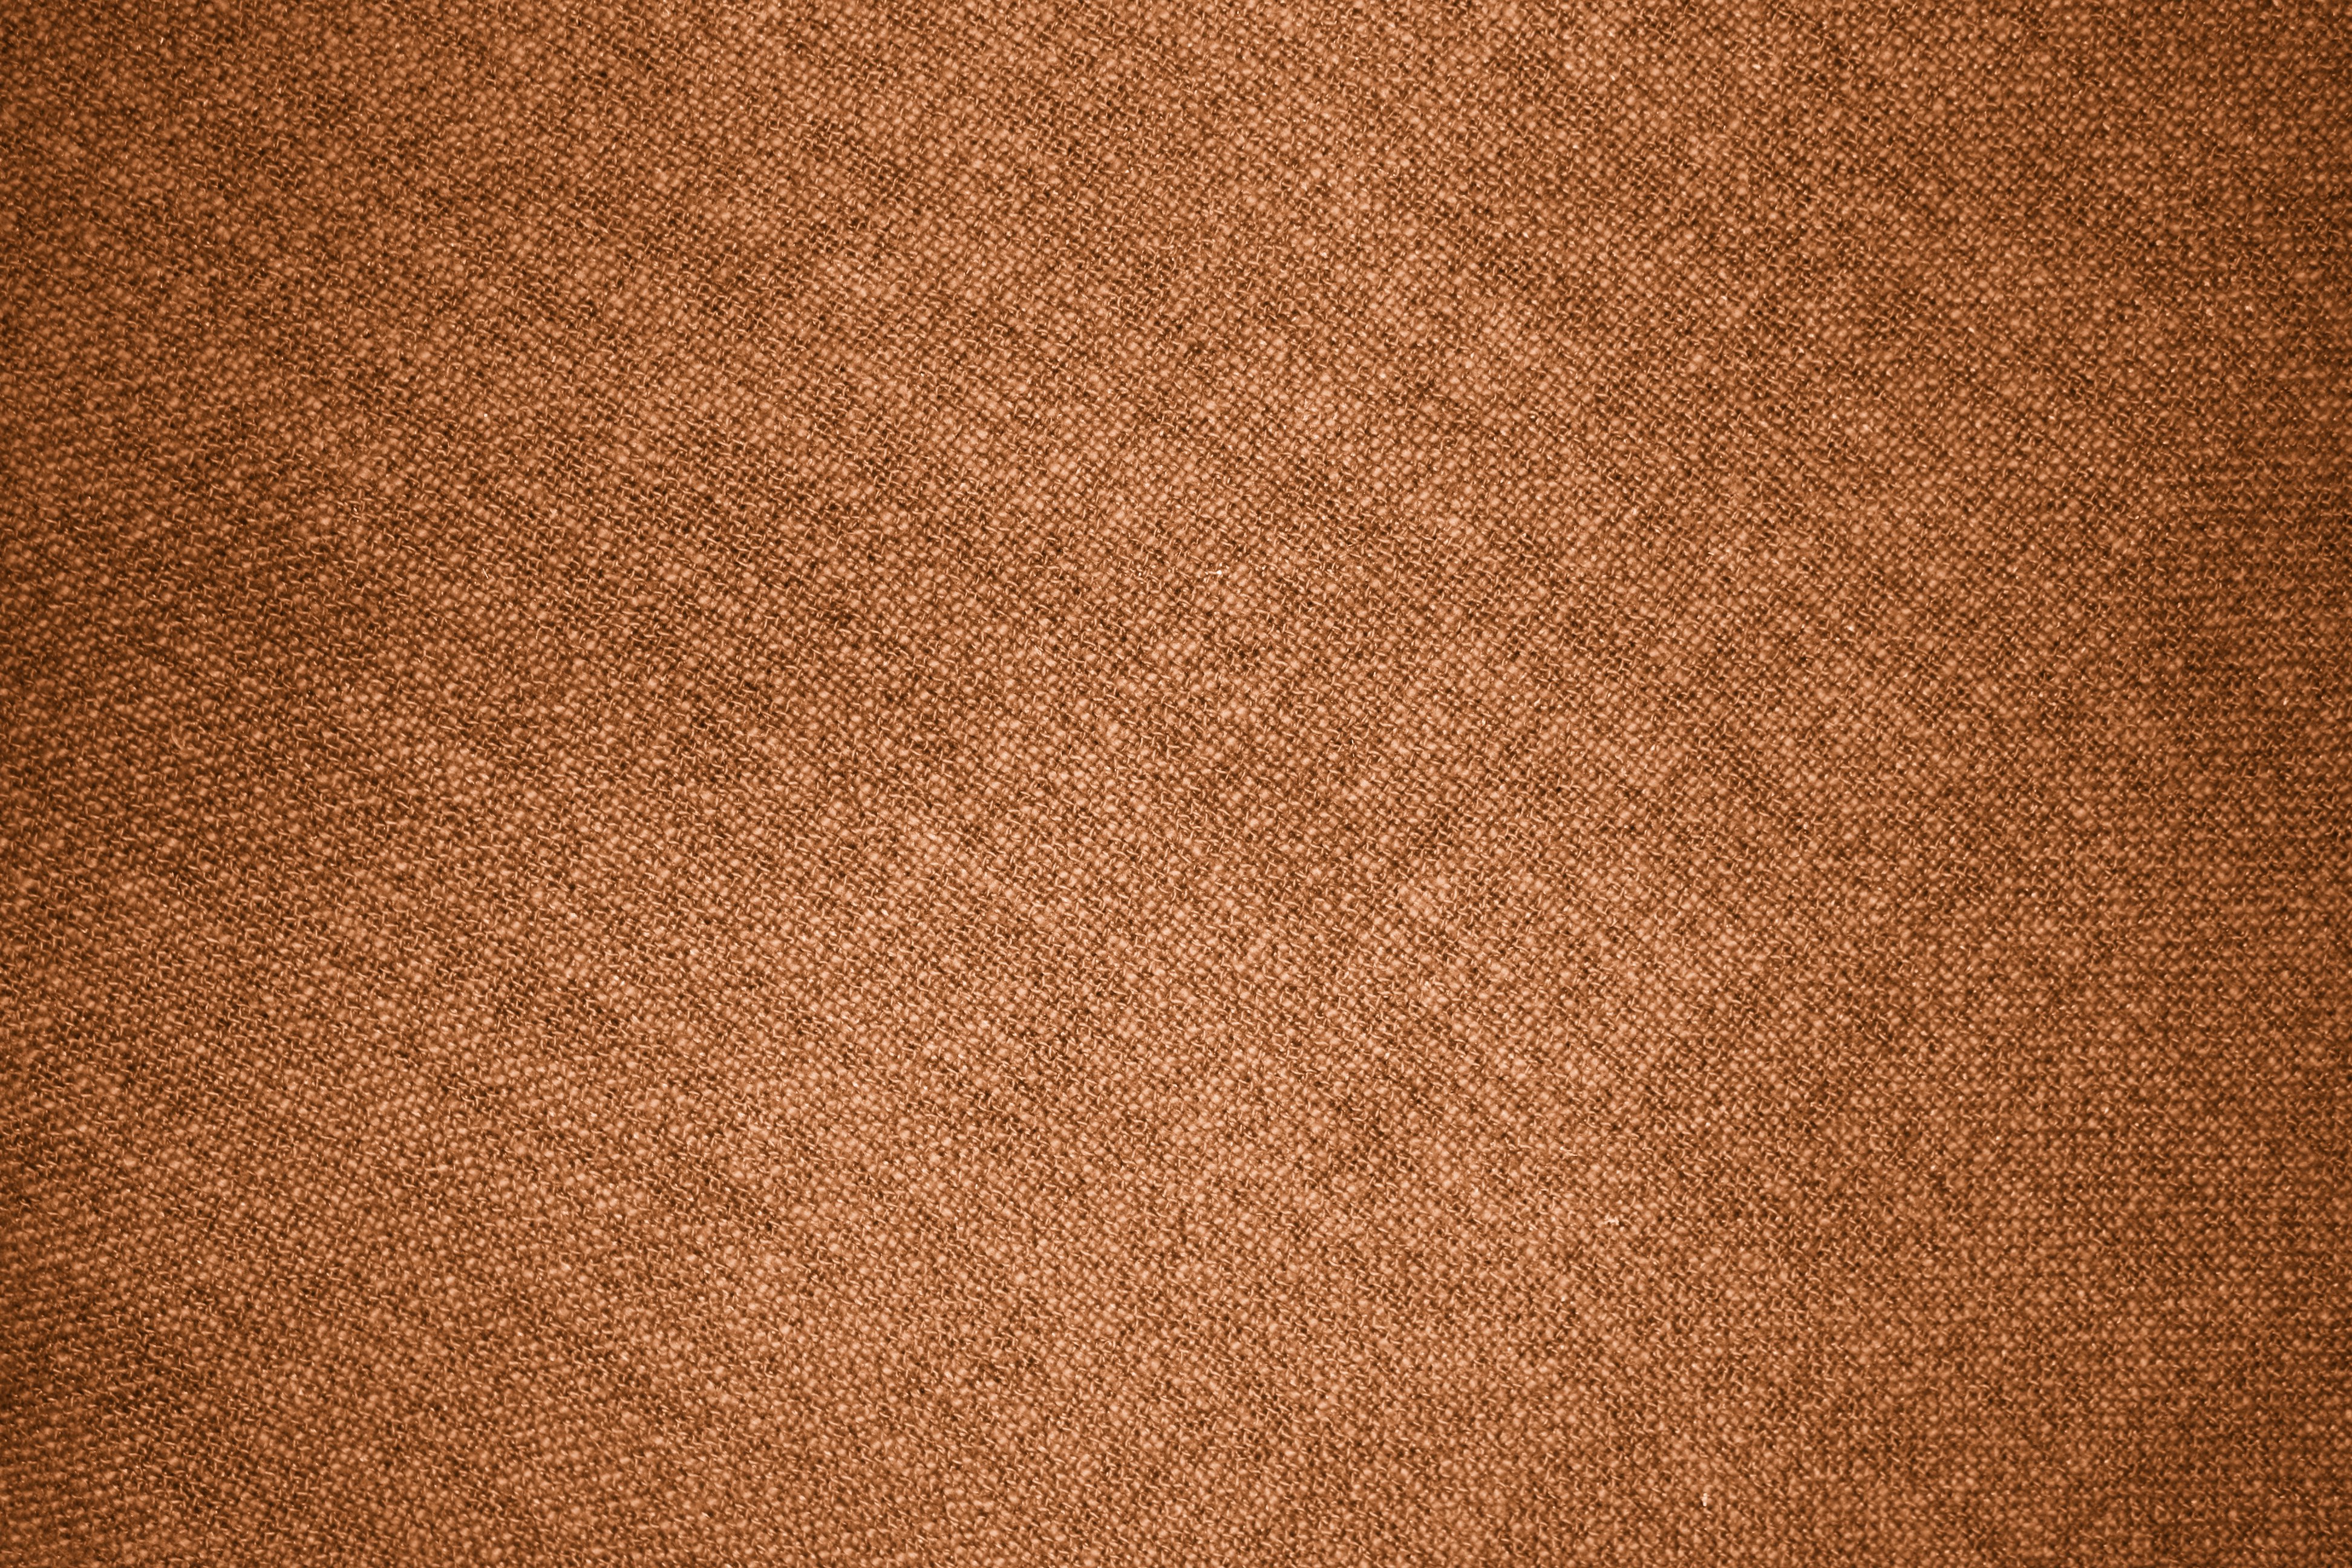 Texture Template Simple Brown 3888x2592